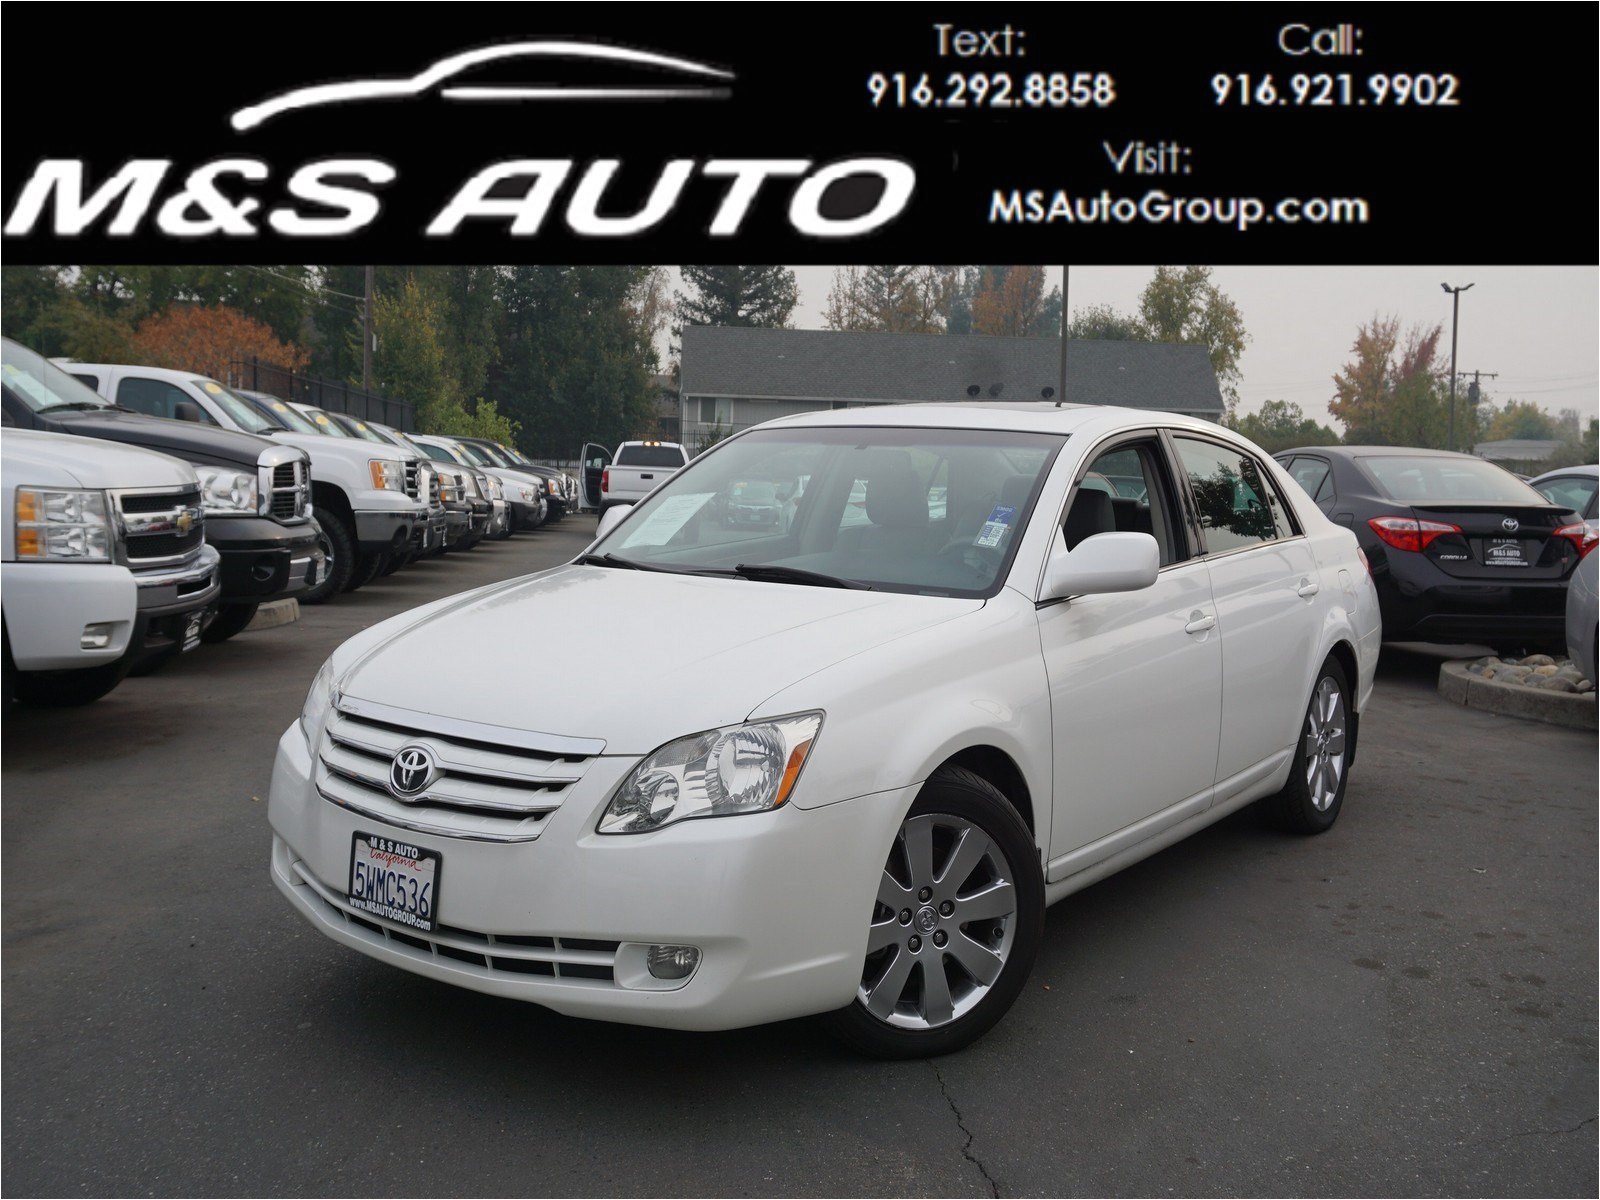 pre owned 2006 toyota avalon xls